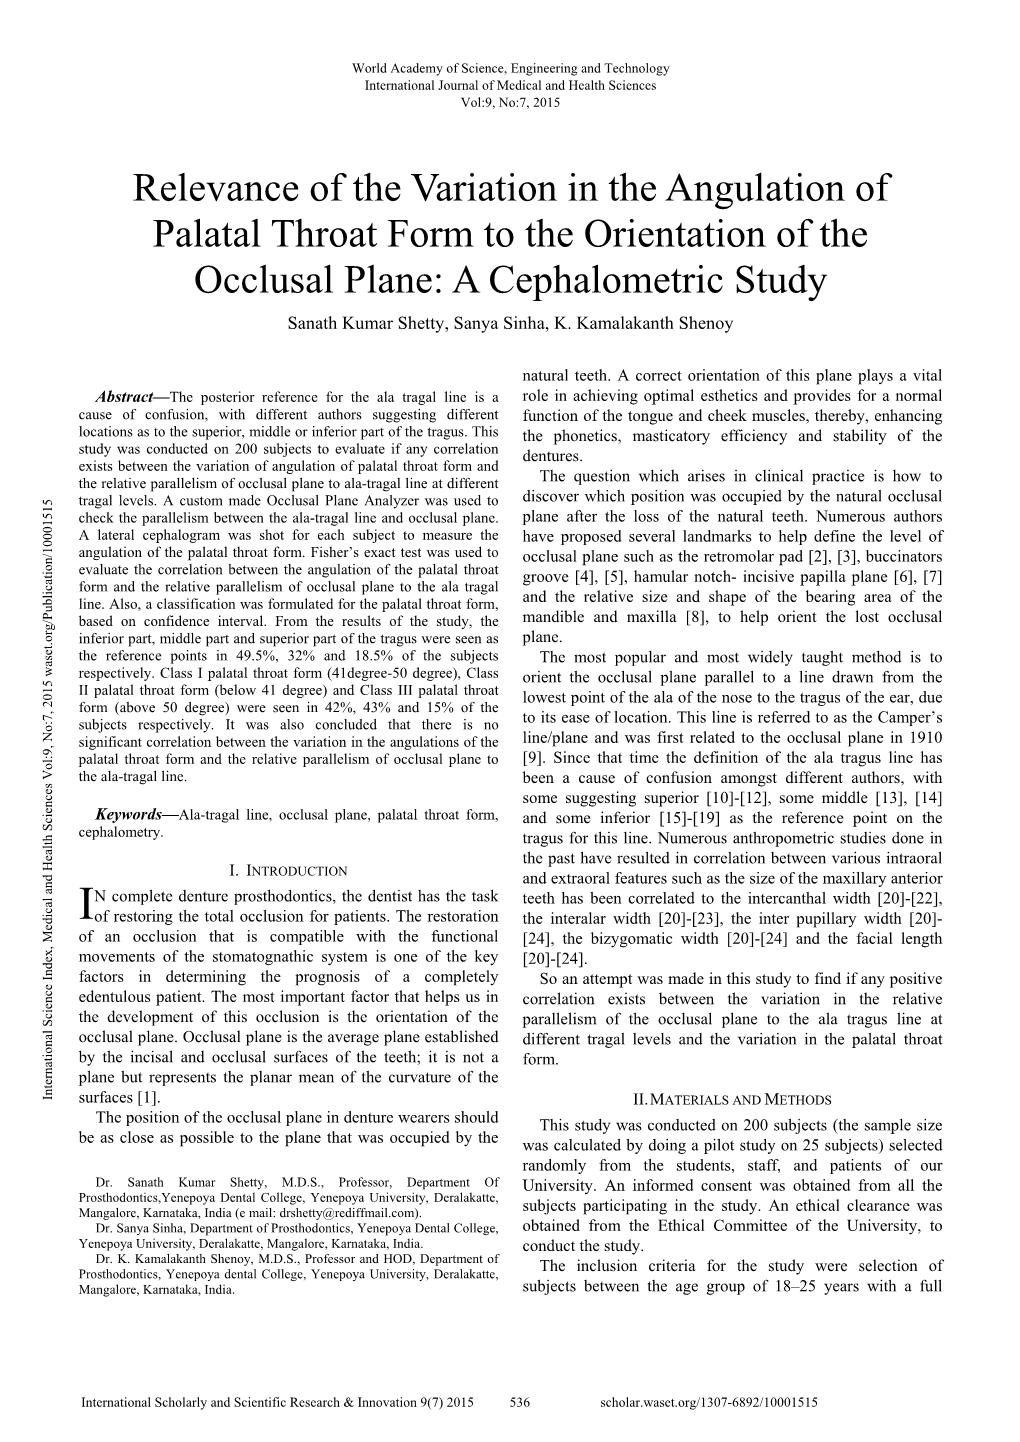 Relevance of the Variation in the Angulation of Palatal Throat Form To